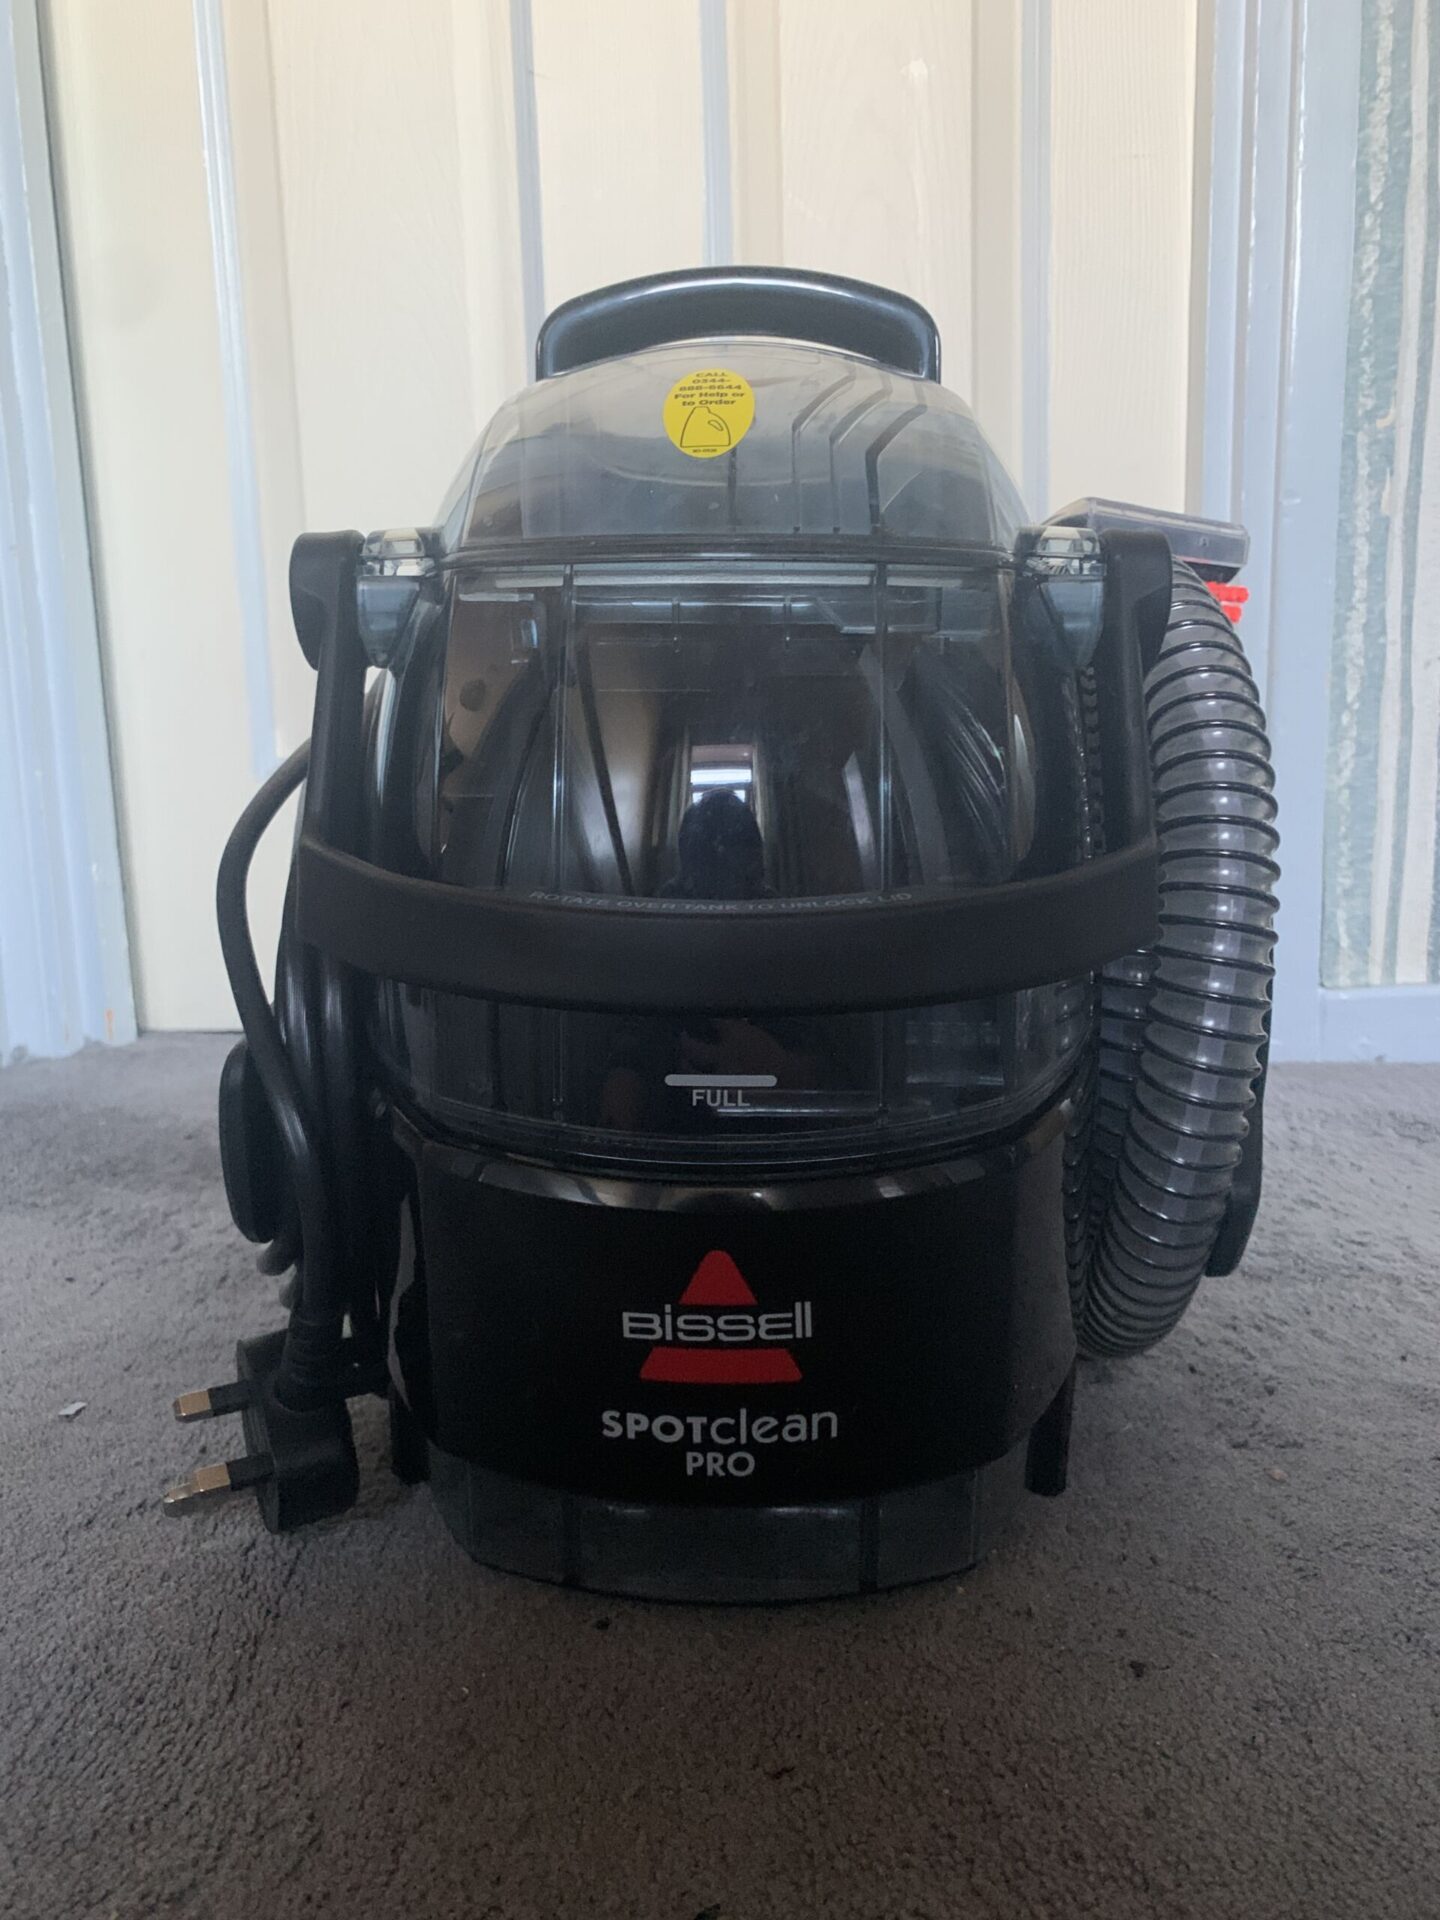 Bissell SpotClean Pro Review | Is it worth your money?